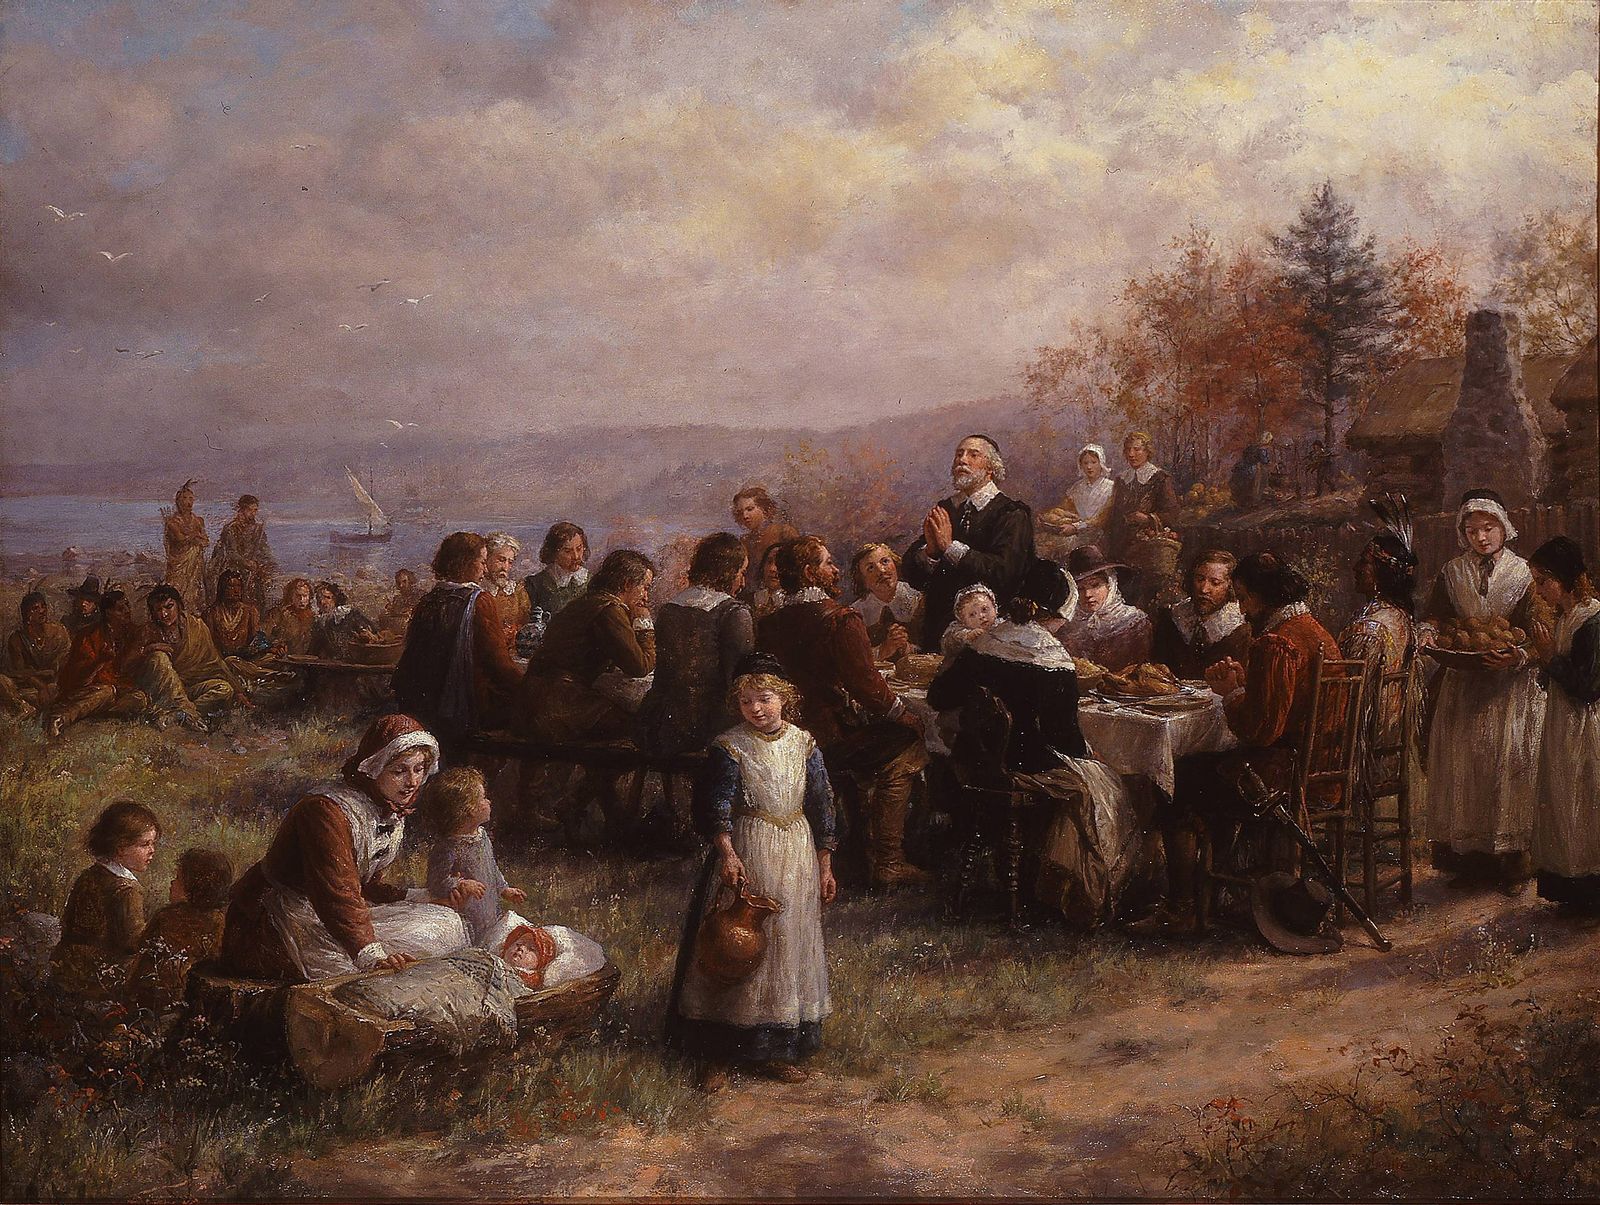 A Short History of Thanksgiving Day Football in America